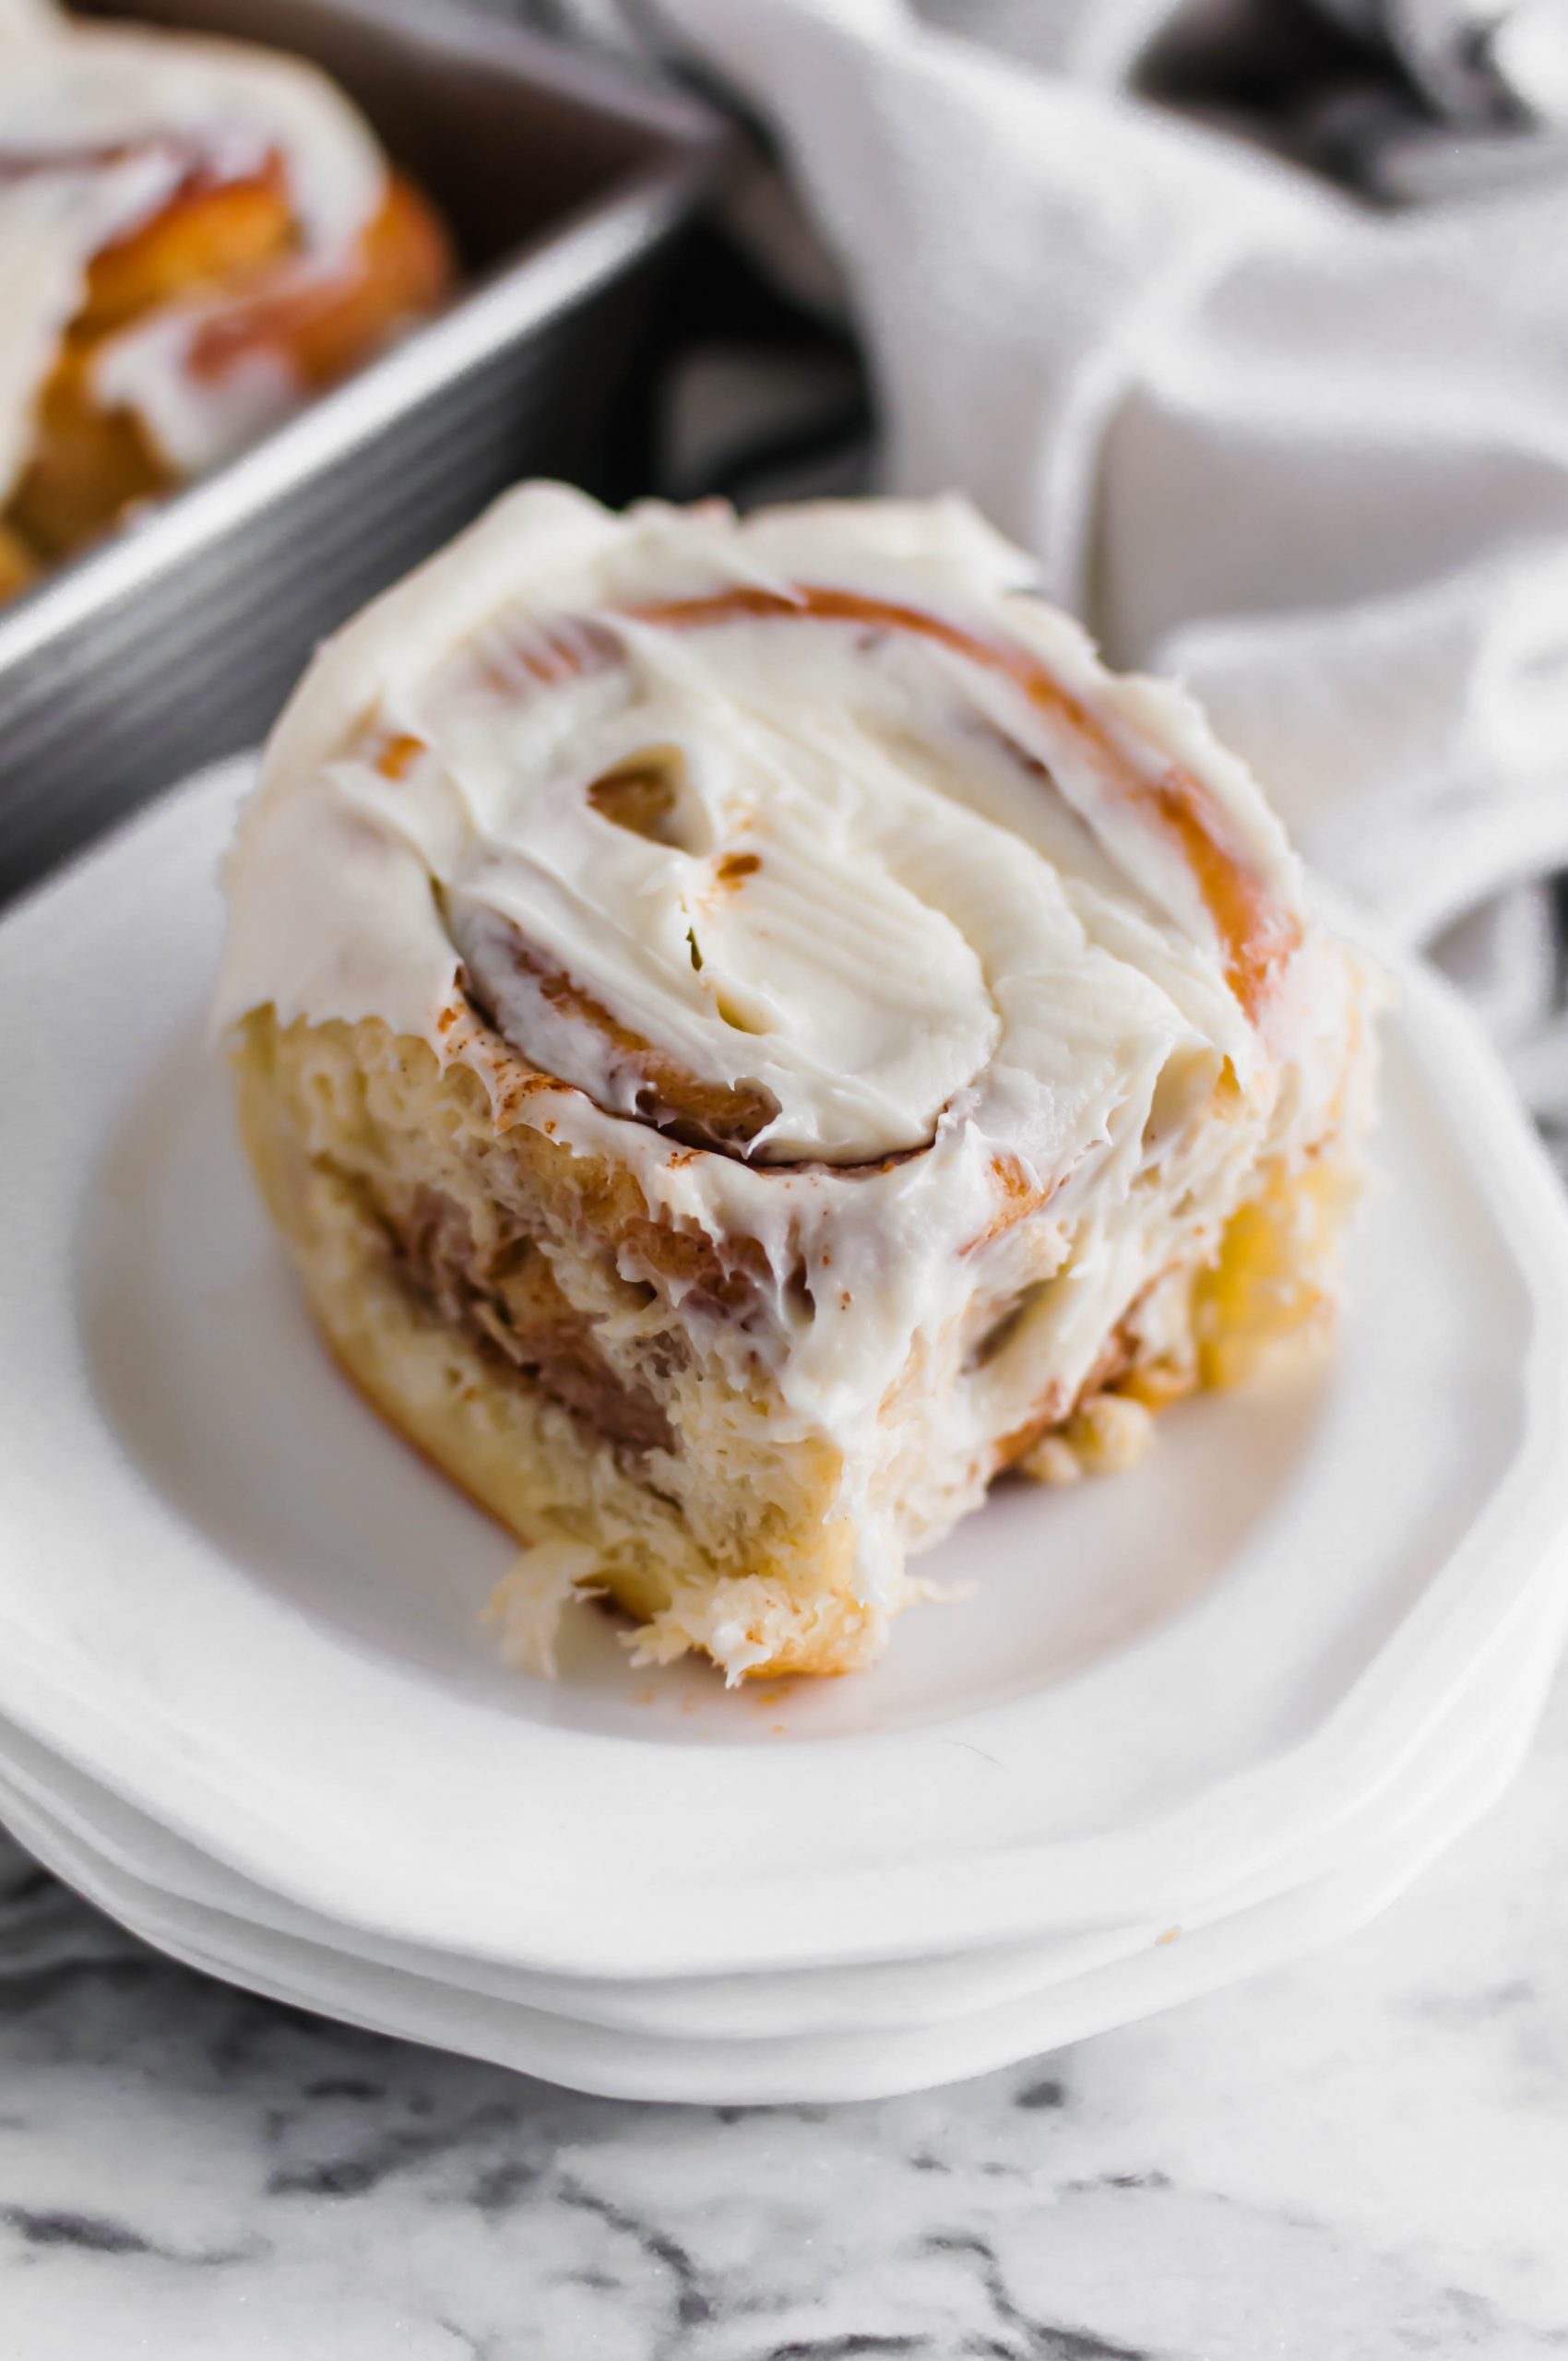 Making you own Copycat Cinnabon Cinnamon Rolls is easier than you may think. You're only a few basic ingredients and 3 hours away from the most delicious cinnamon rolls. Let's get baking.